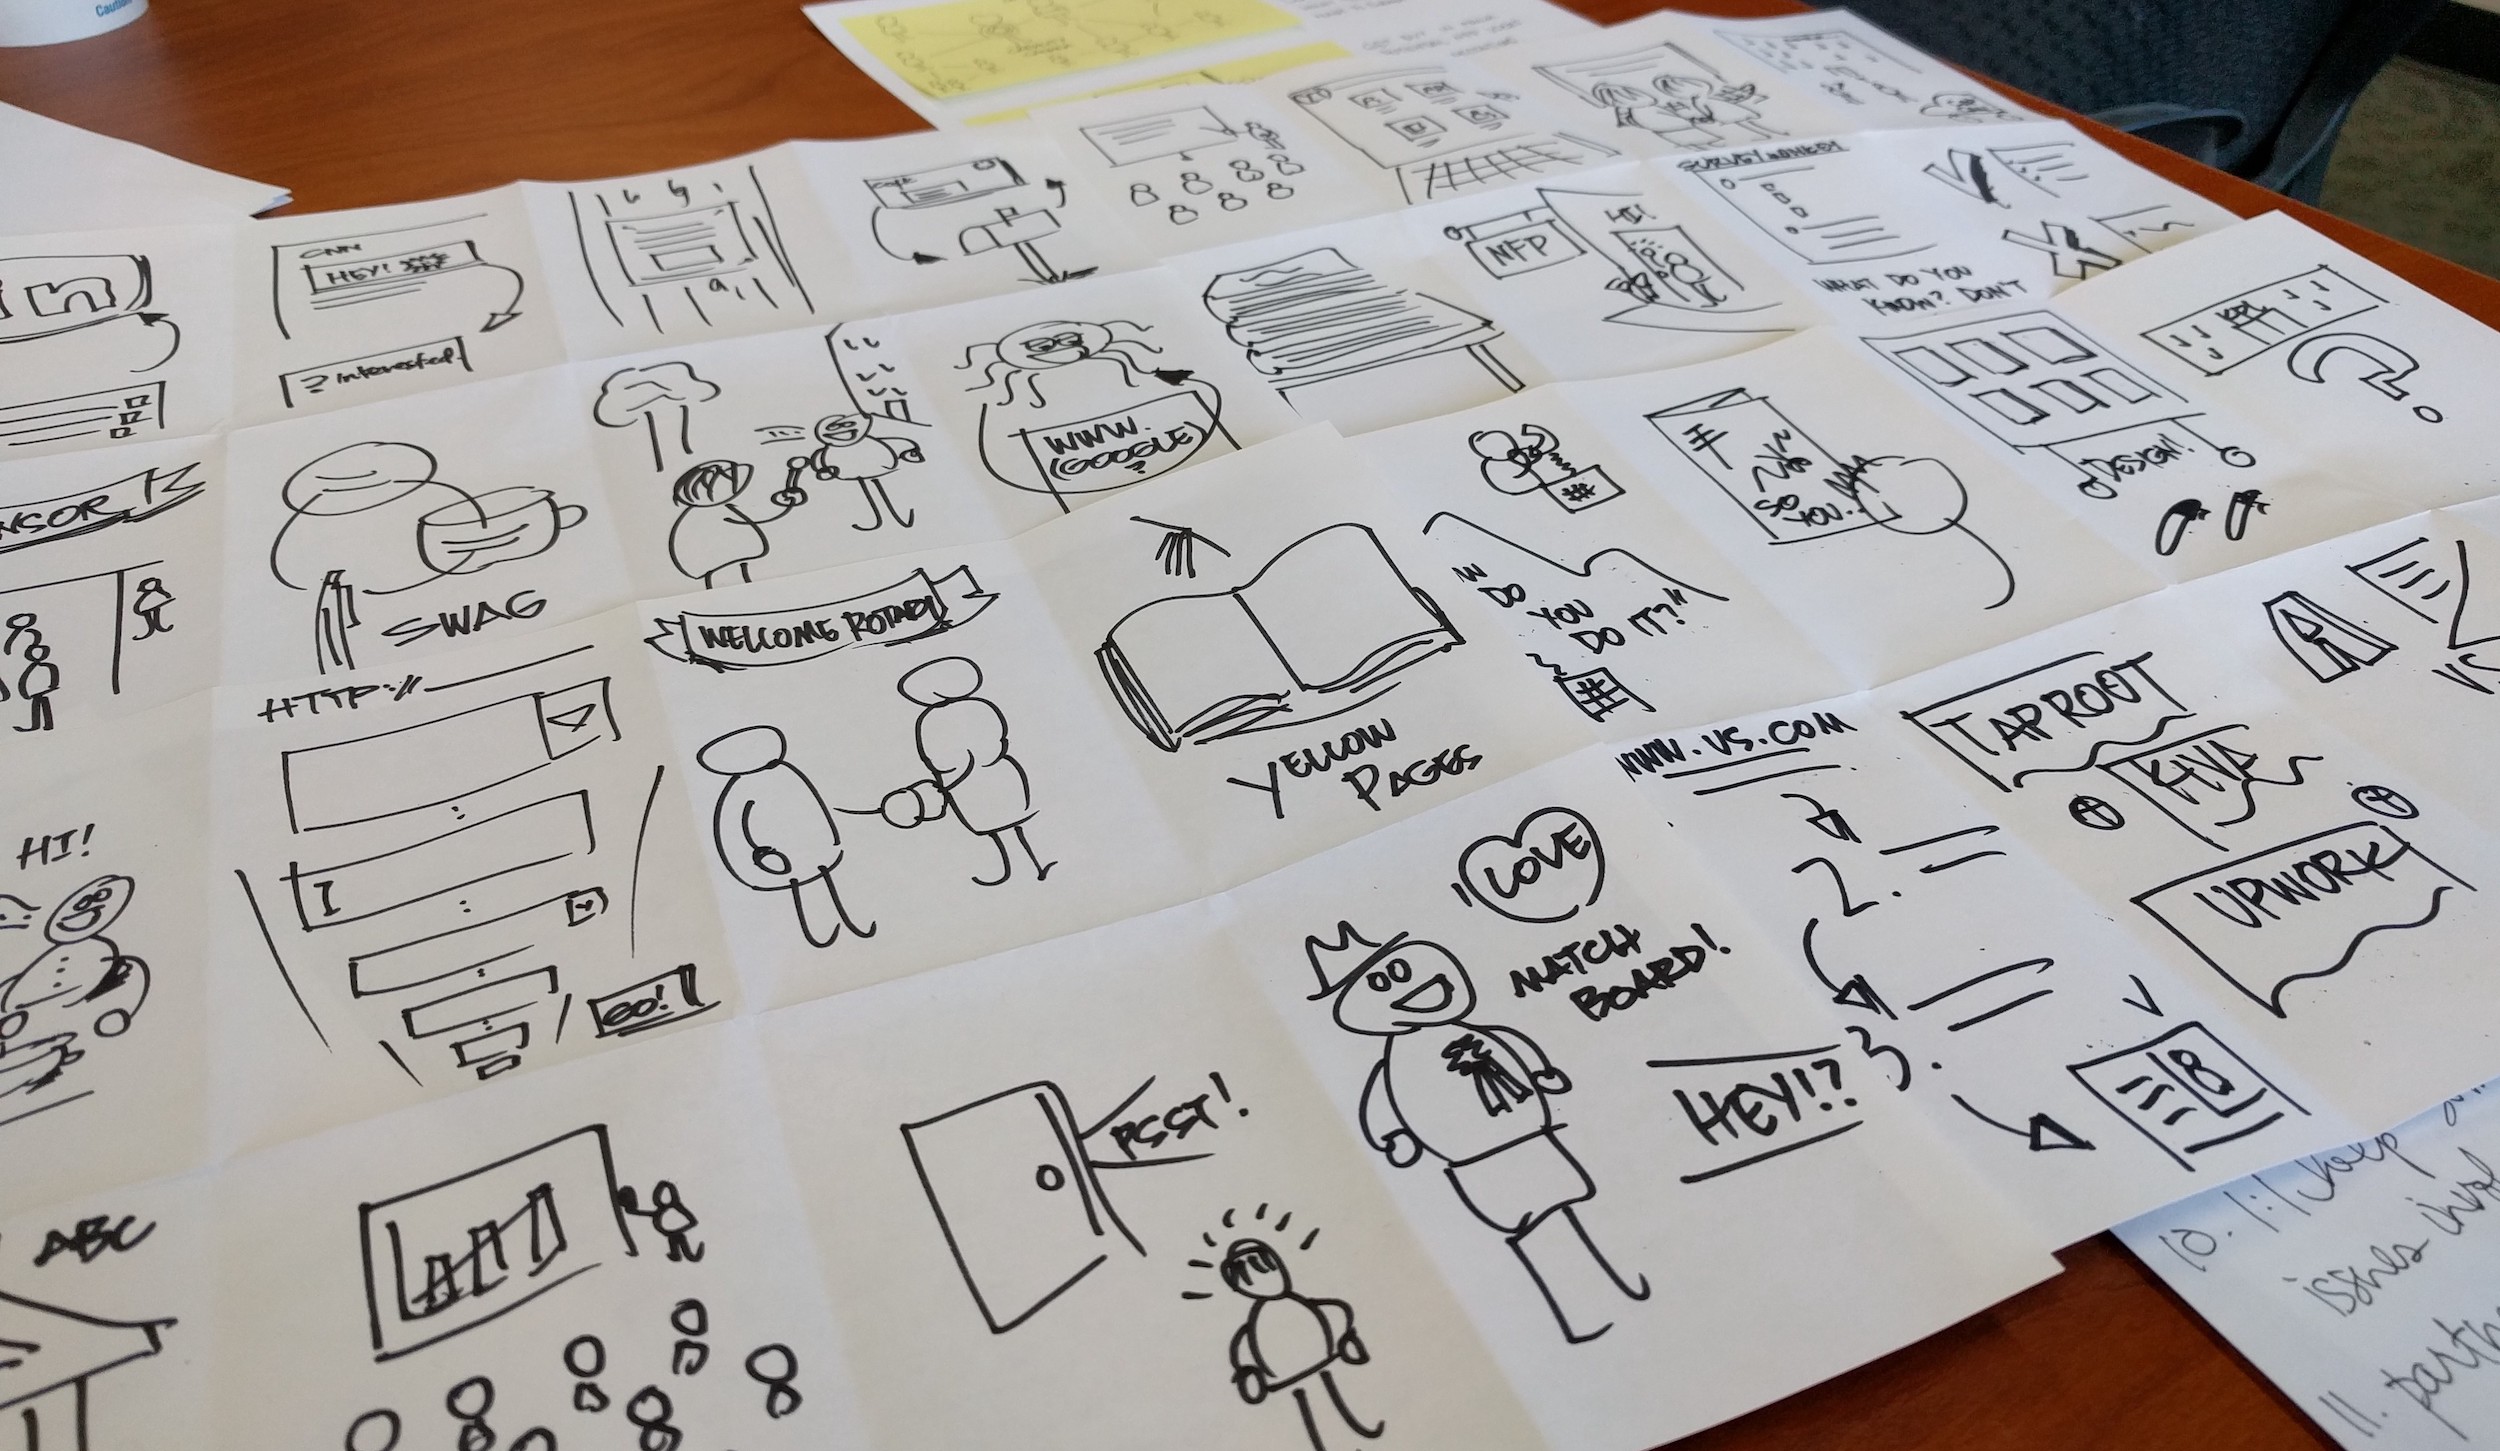 Storyboards in the form of simple marker drawings on paper